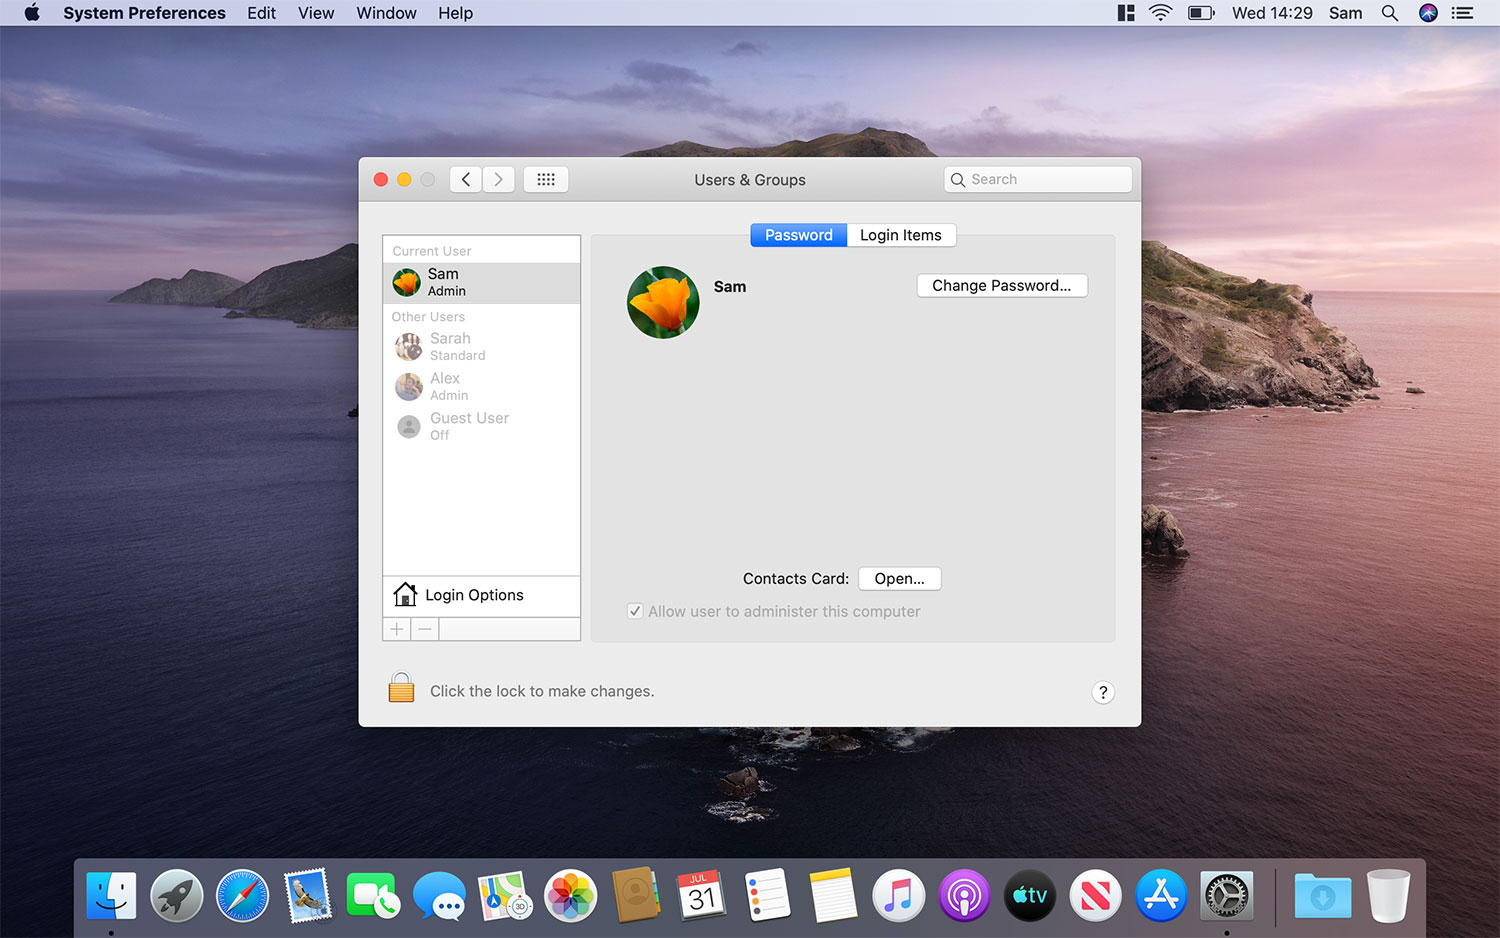  How to delete a user on a Mac